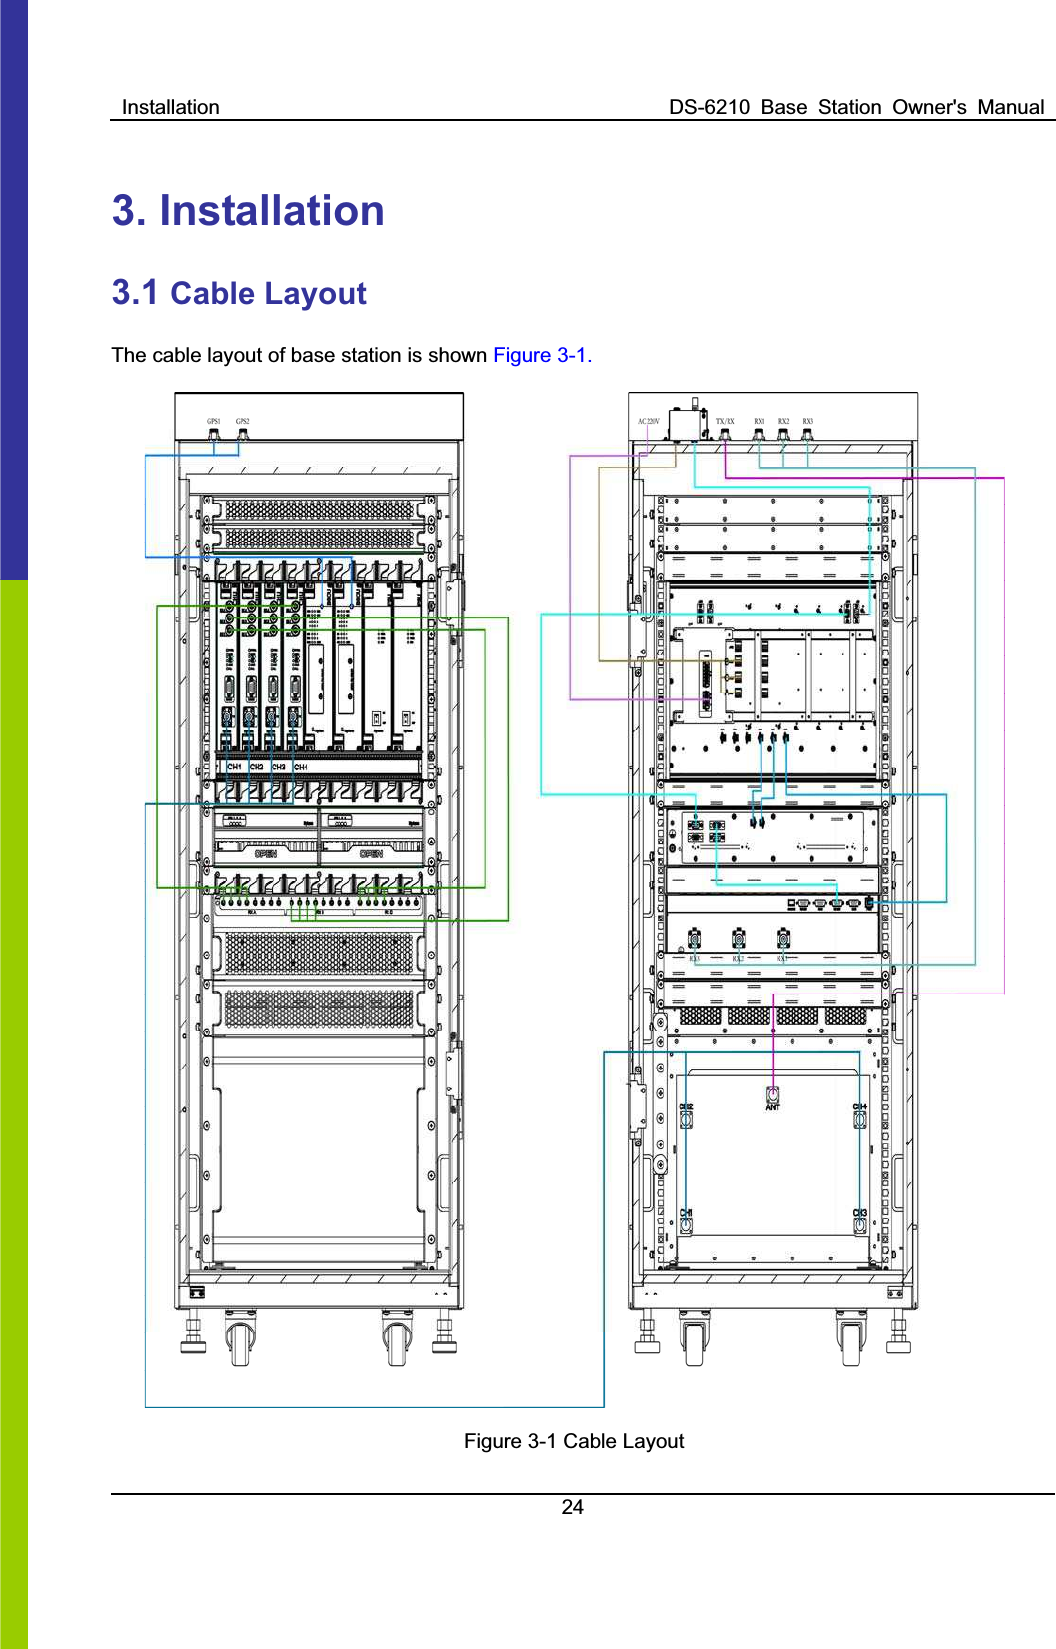 Installation  DS-6210  Base  Station  Owner&apos;s  Manual243. Installation   3.1 Cable Layout   The cable layout of base station is shown Figure 3-1.Figure 3-1 Cable Layout 